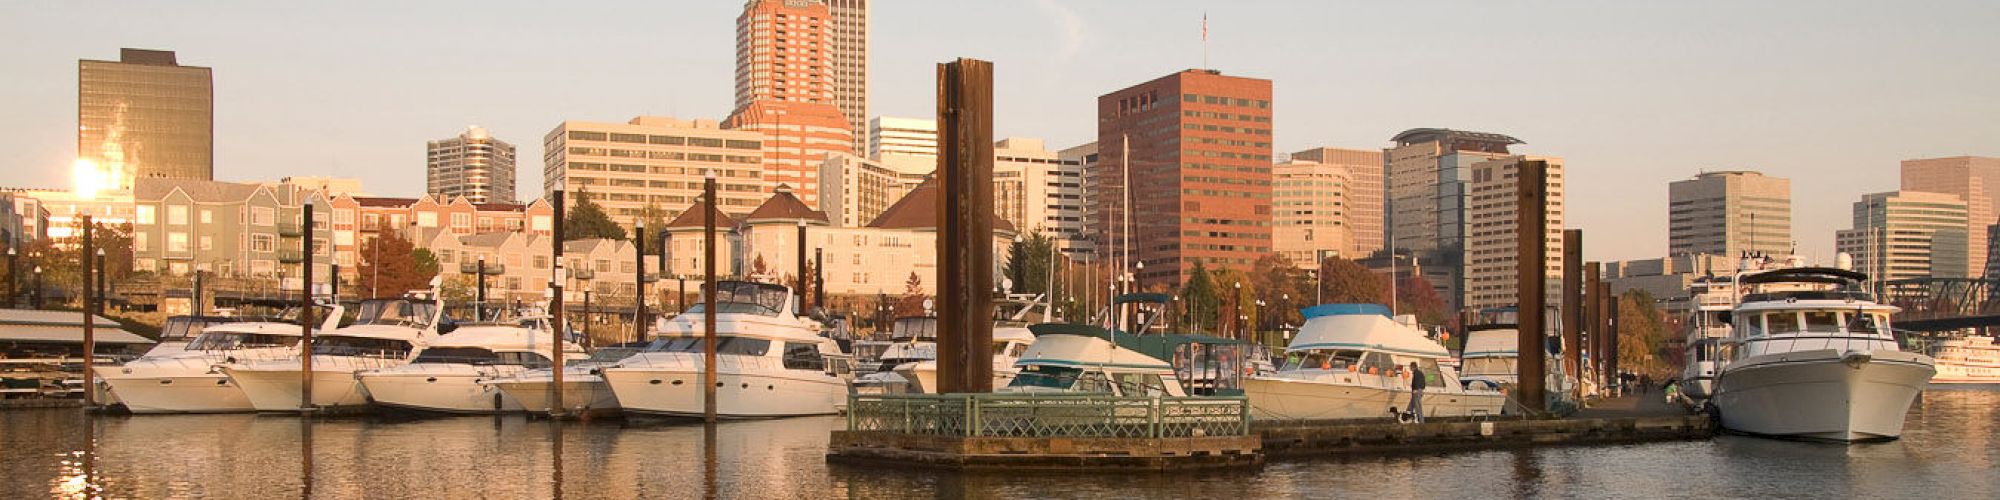 The image shows a marina with boats docked in the water, and a cityscape with tall buildings in the background.